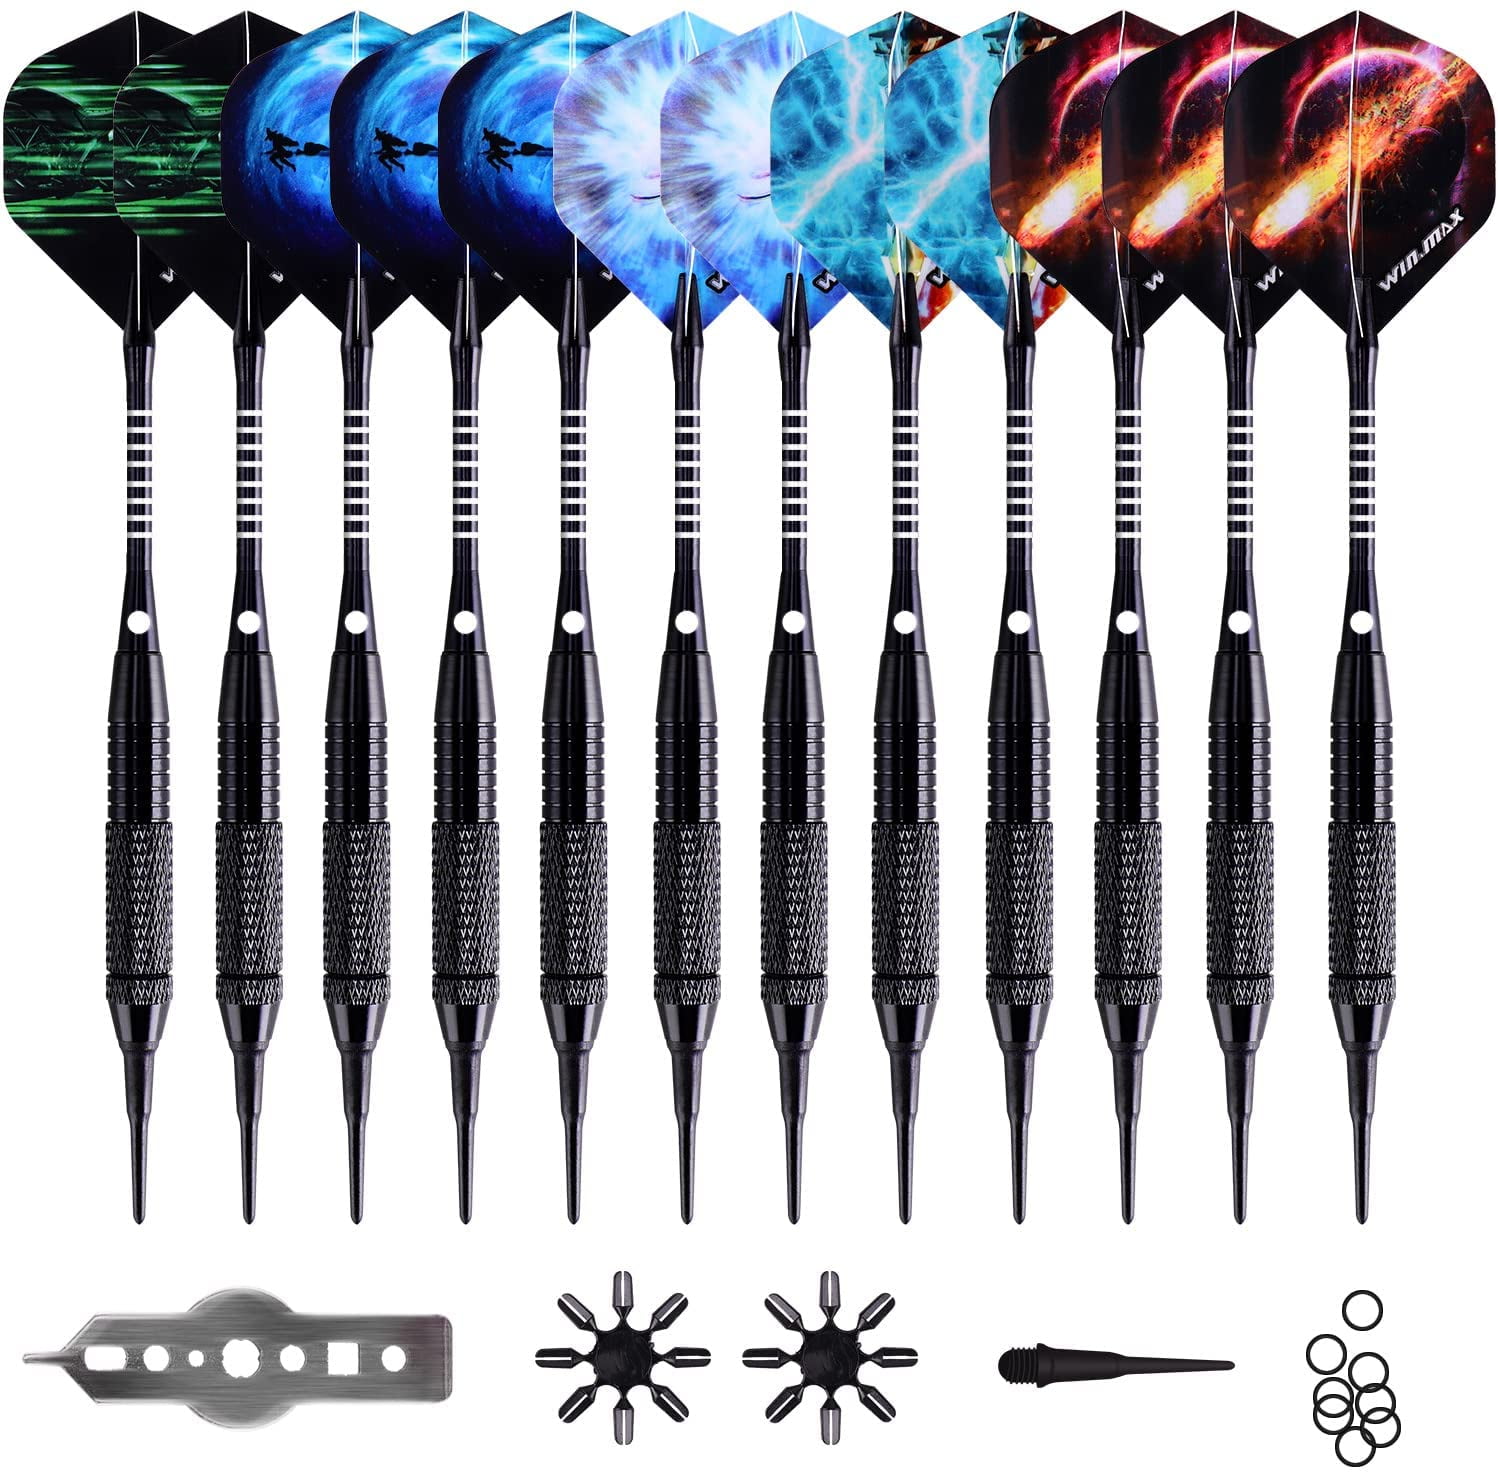 12Pcs Dart Soft Tip Darts 30 Tail Wing 100 Extra Tips for Electronic 